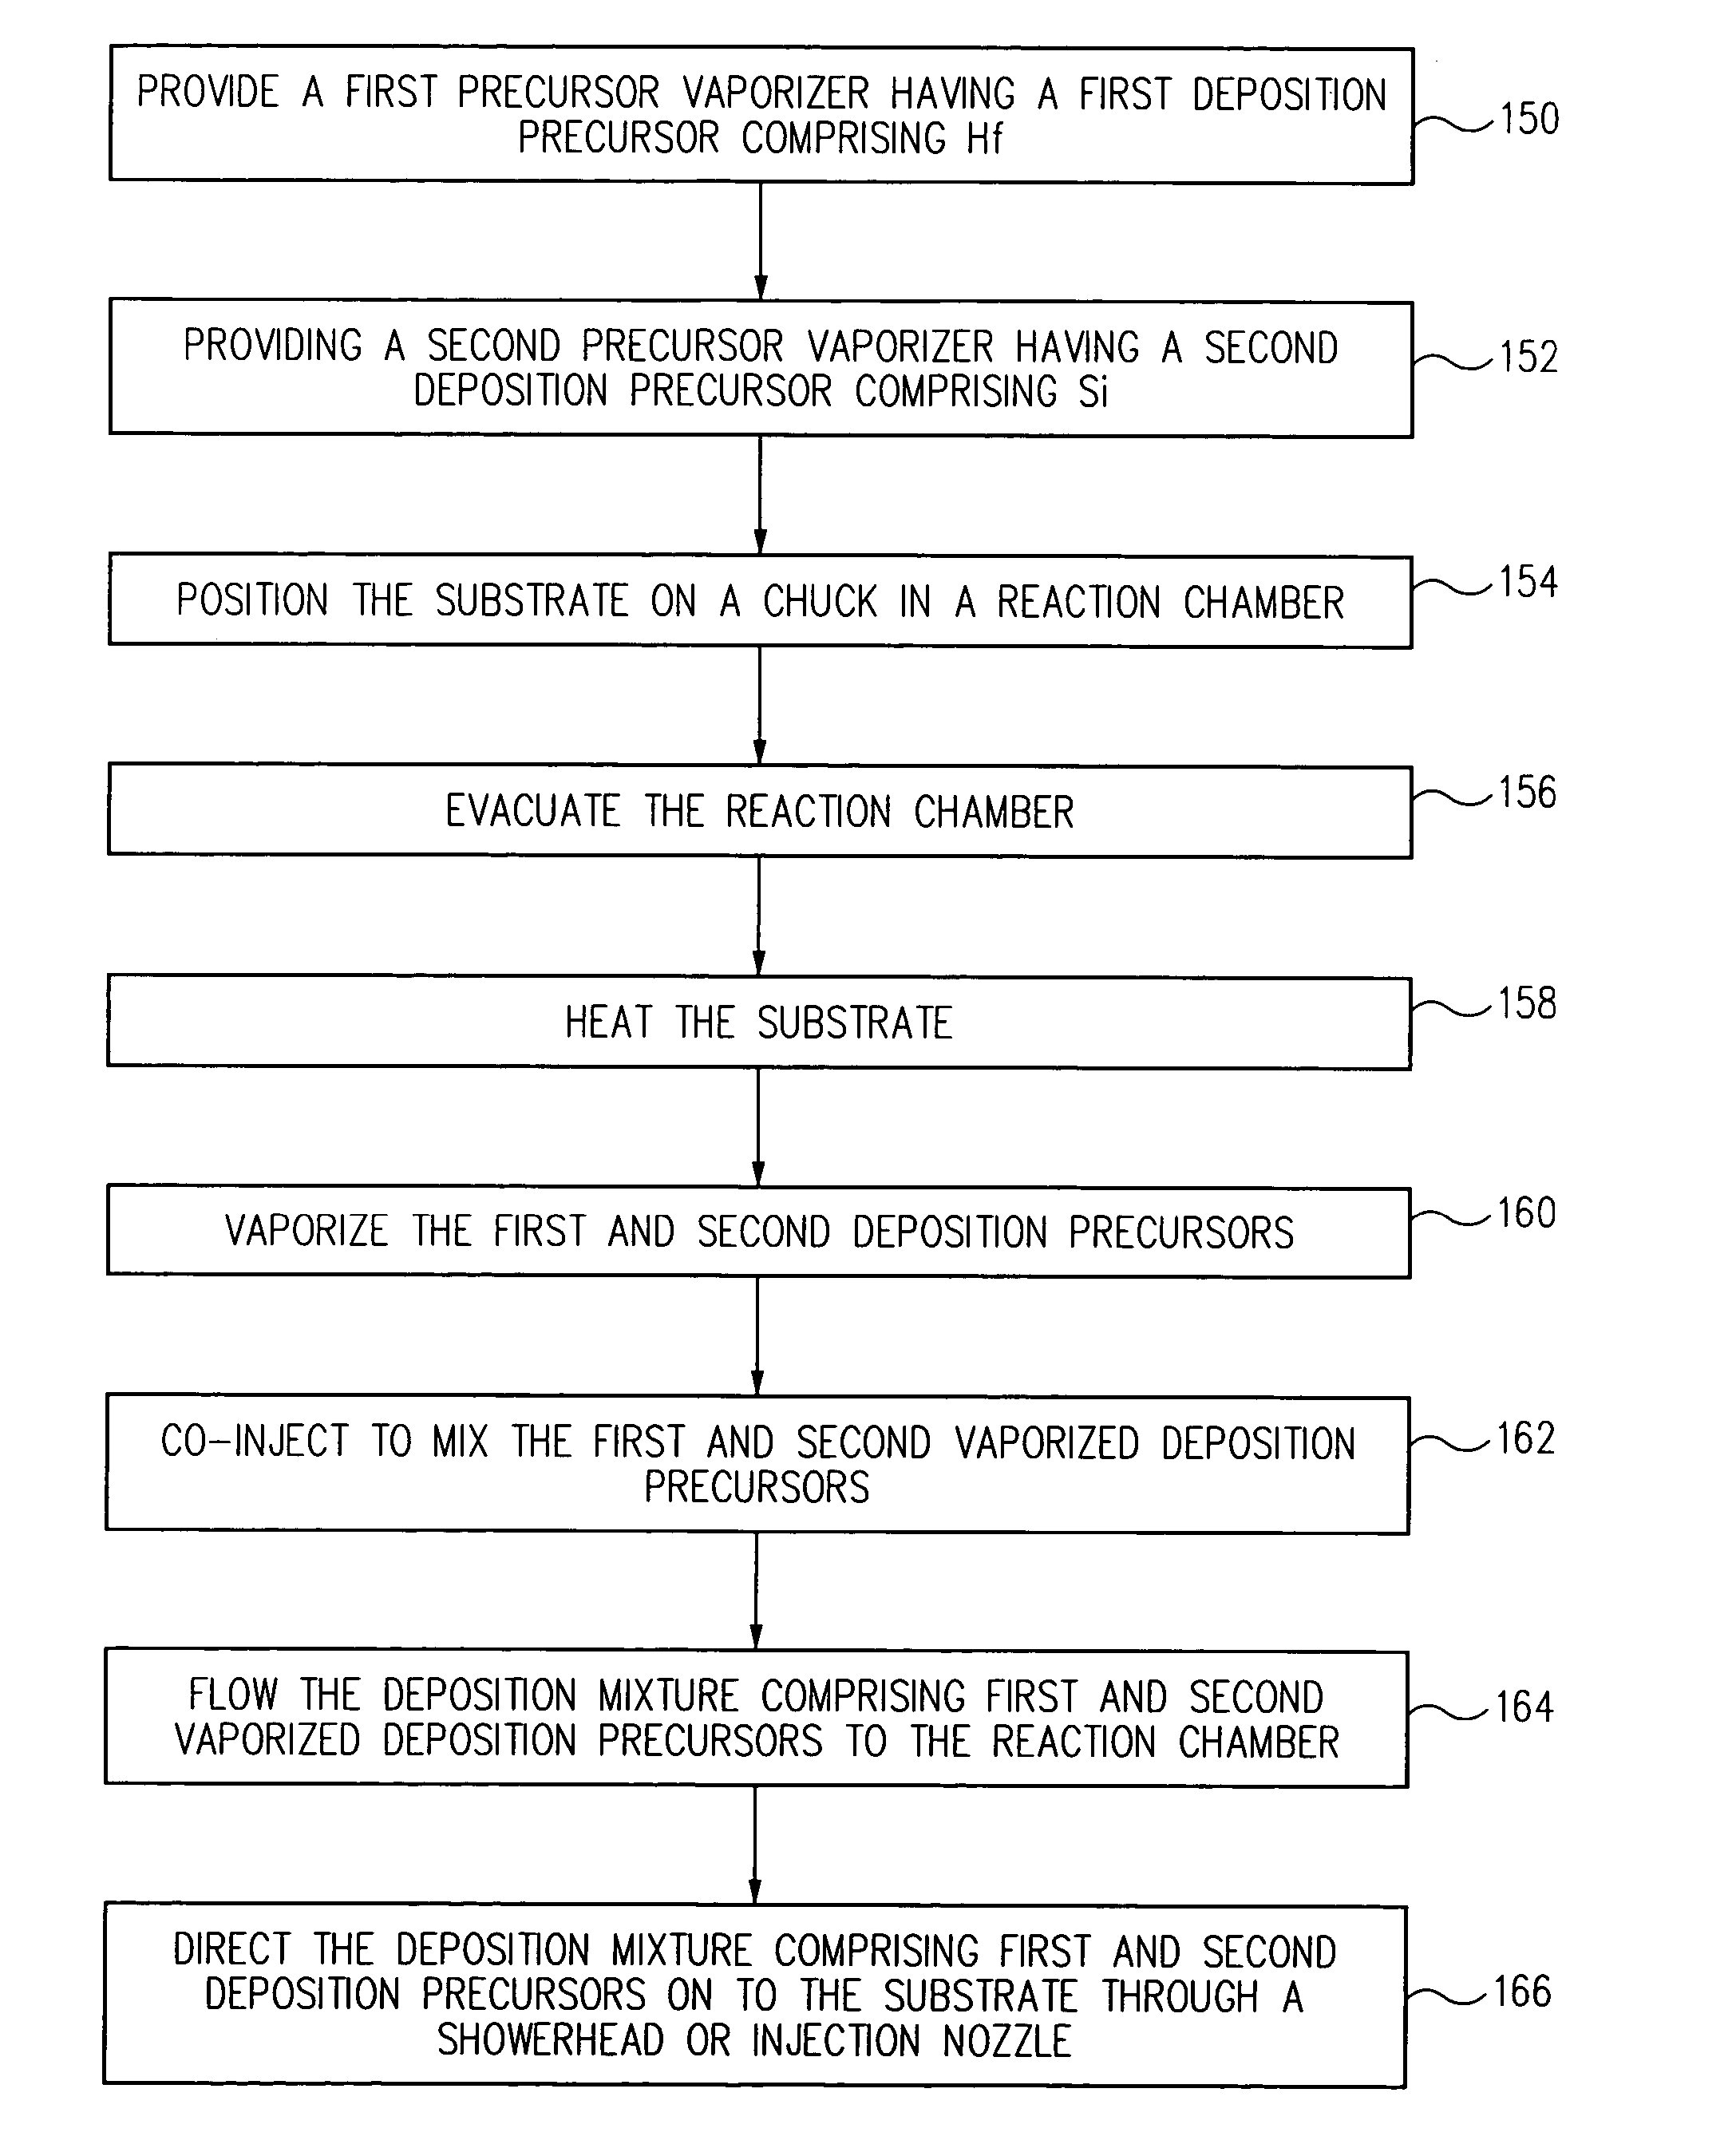 System and method for forming multi-component dielectric films